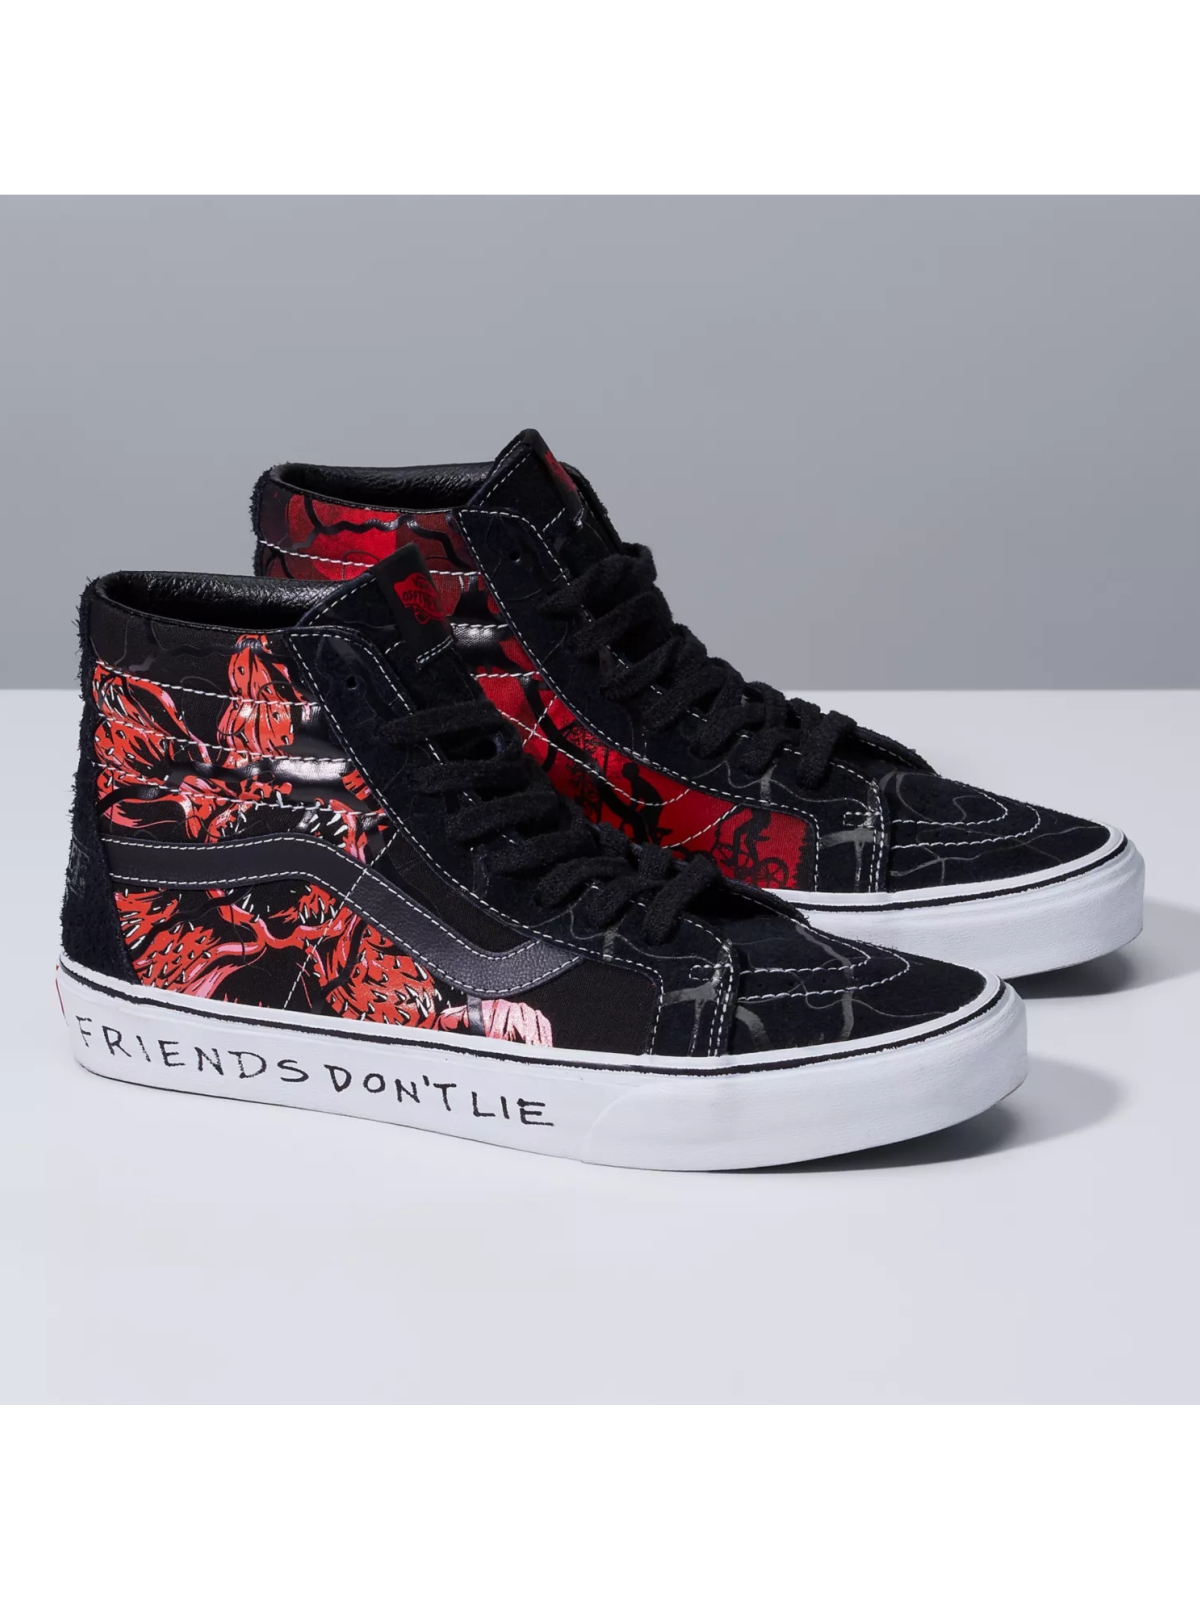 squeeze Logical Ten Vans X Stranger Things Sk8-Hi Reissue Shoes Black/Red – WORMHOLE STORE